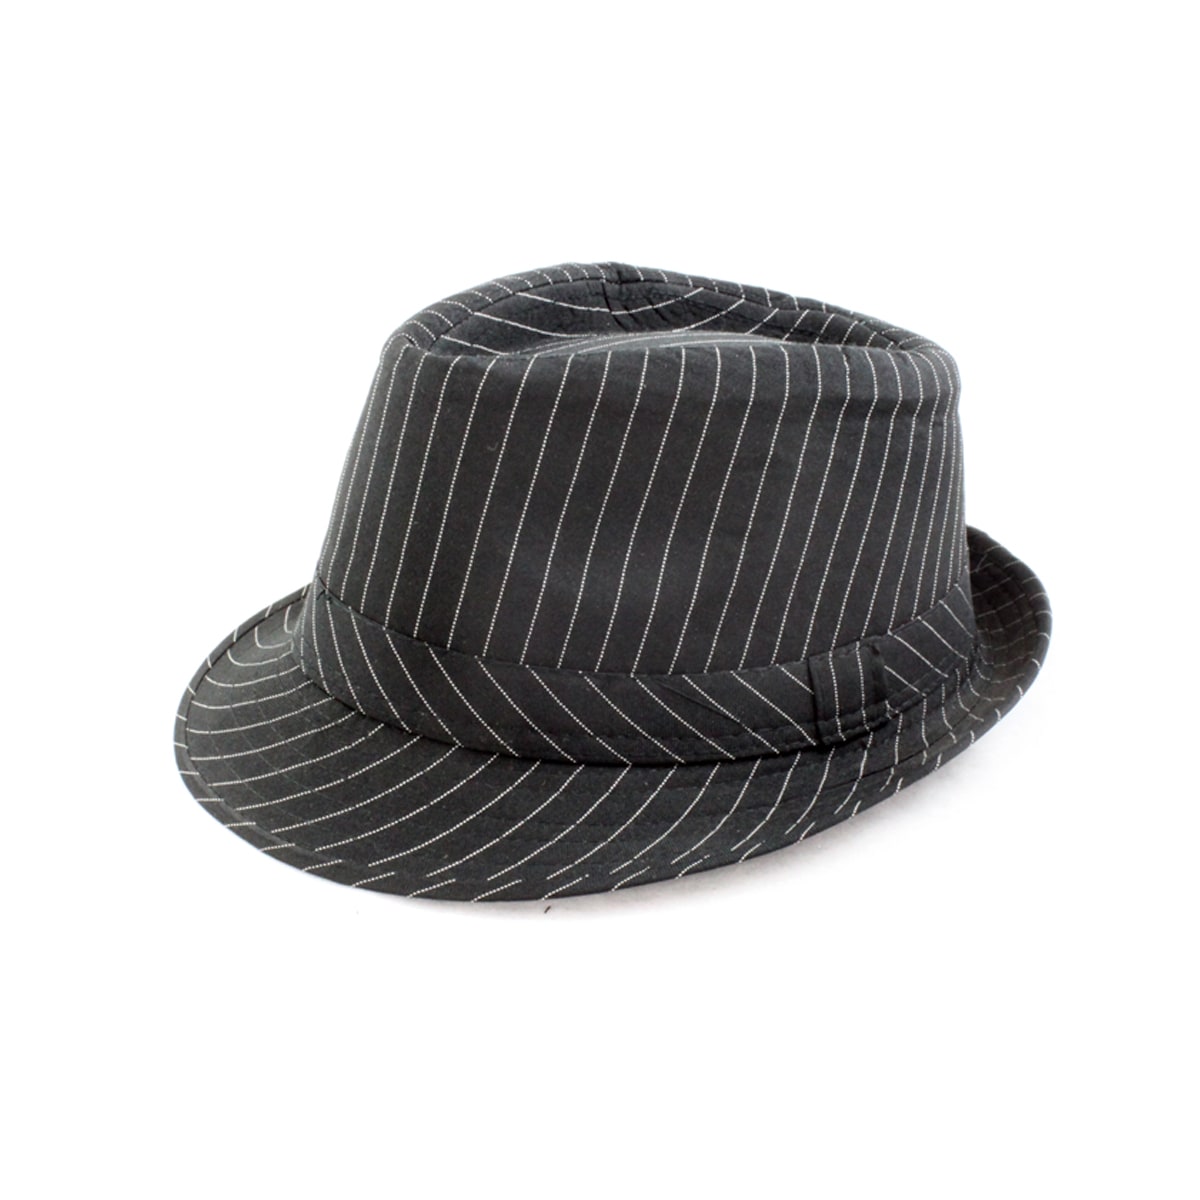 Faddism Black/ White Stripe Fedora Hat - Free Shipping On Orders Over ...